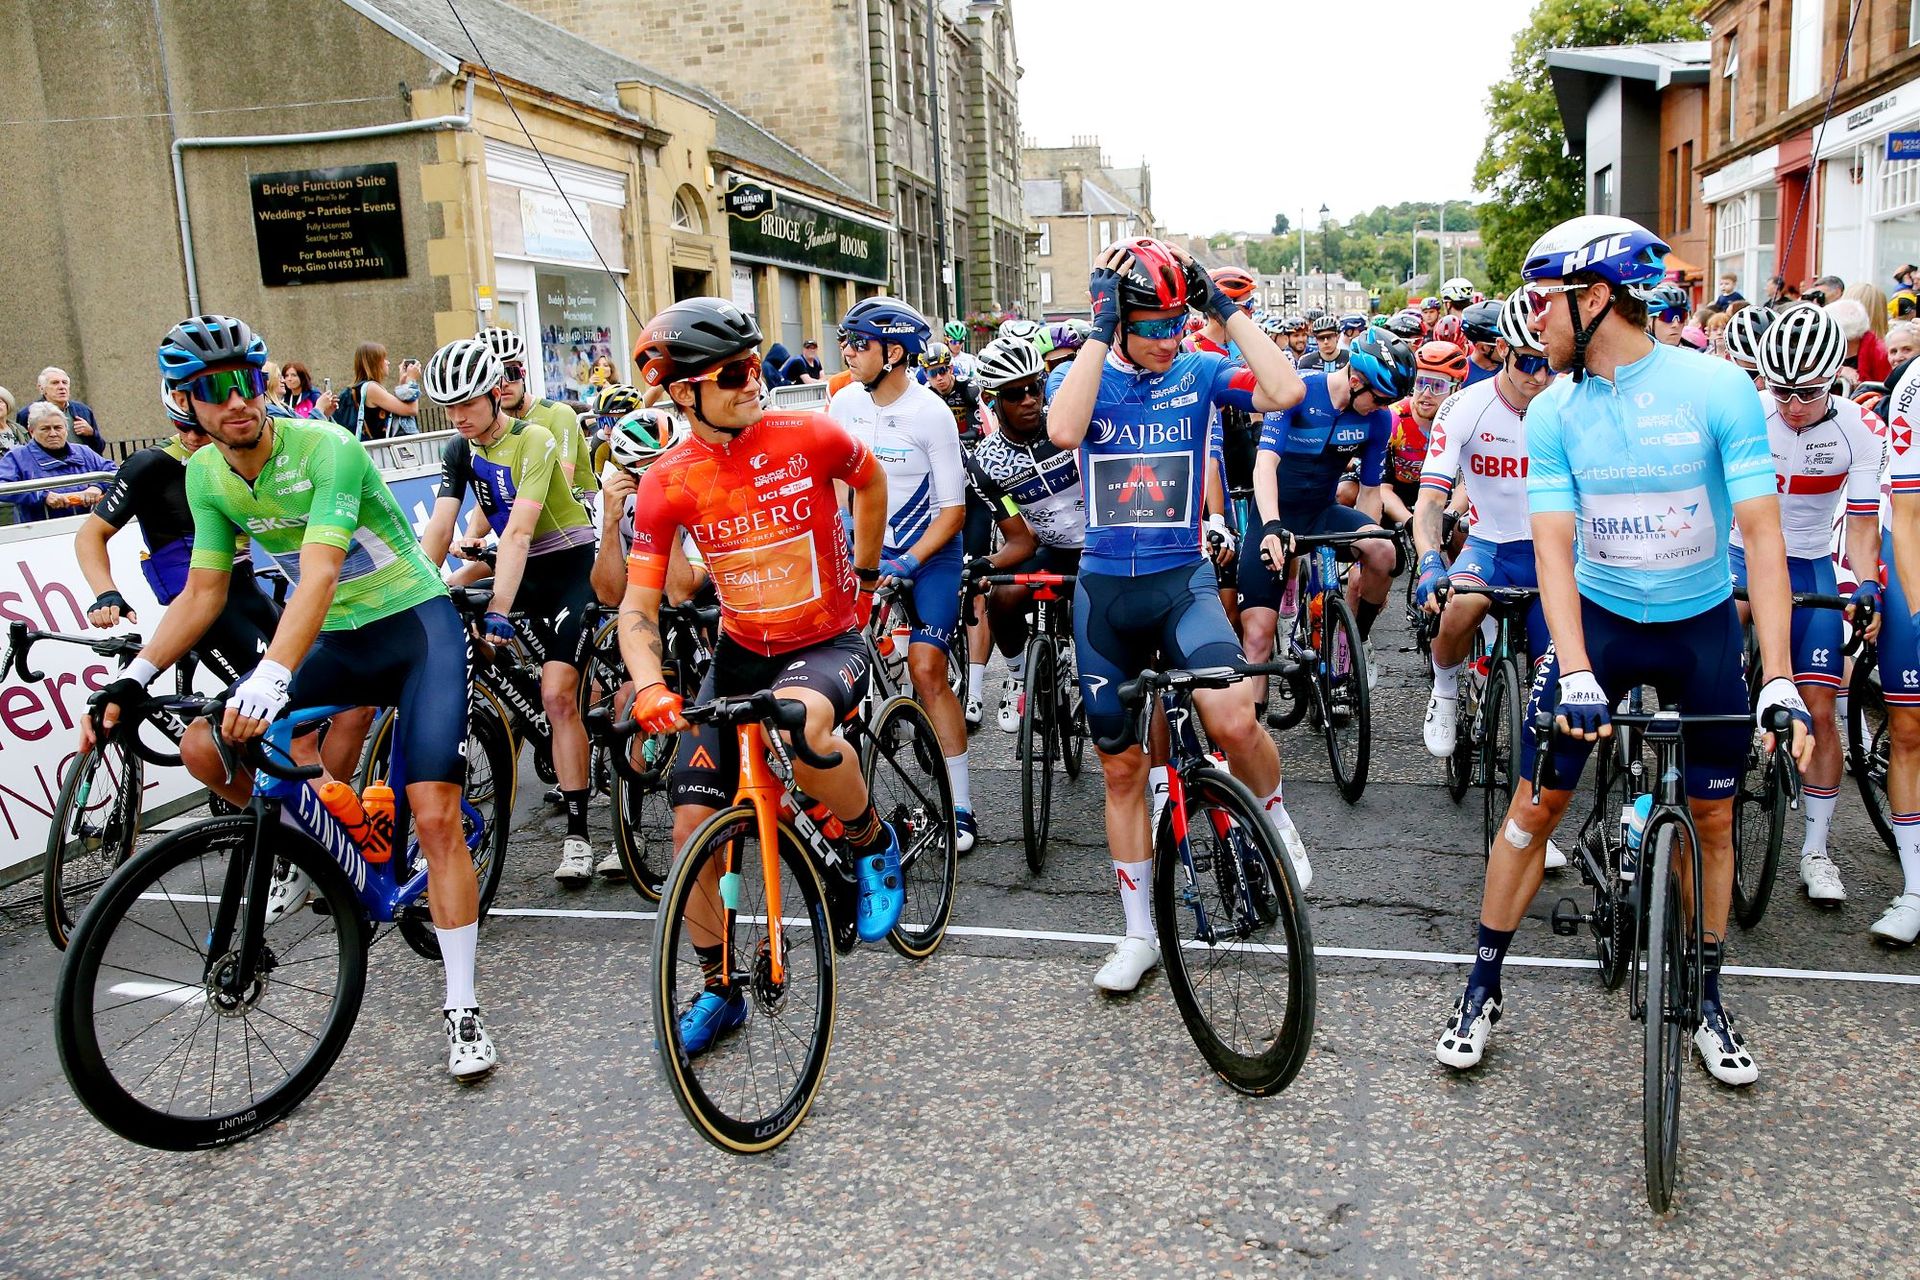 riders in the tour of britain 2022